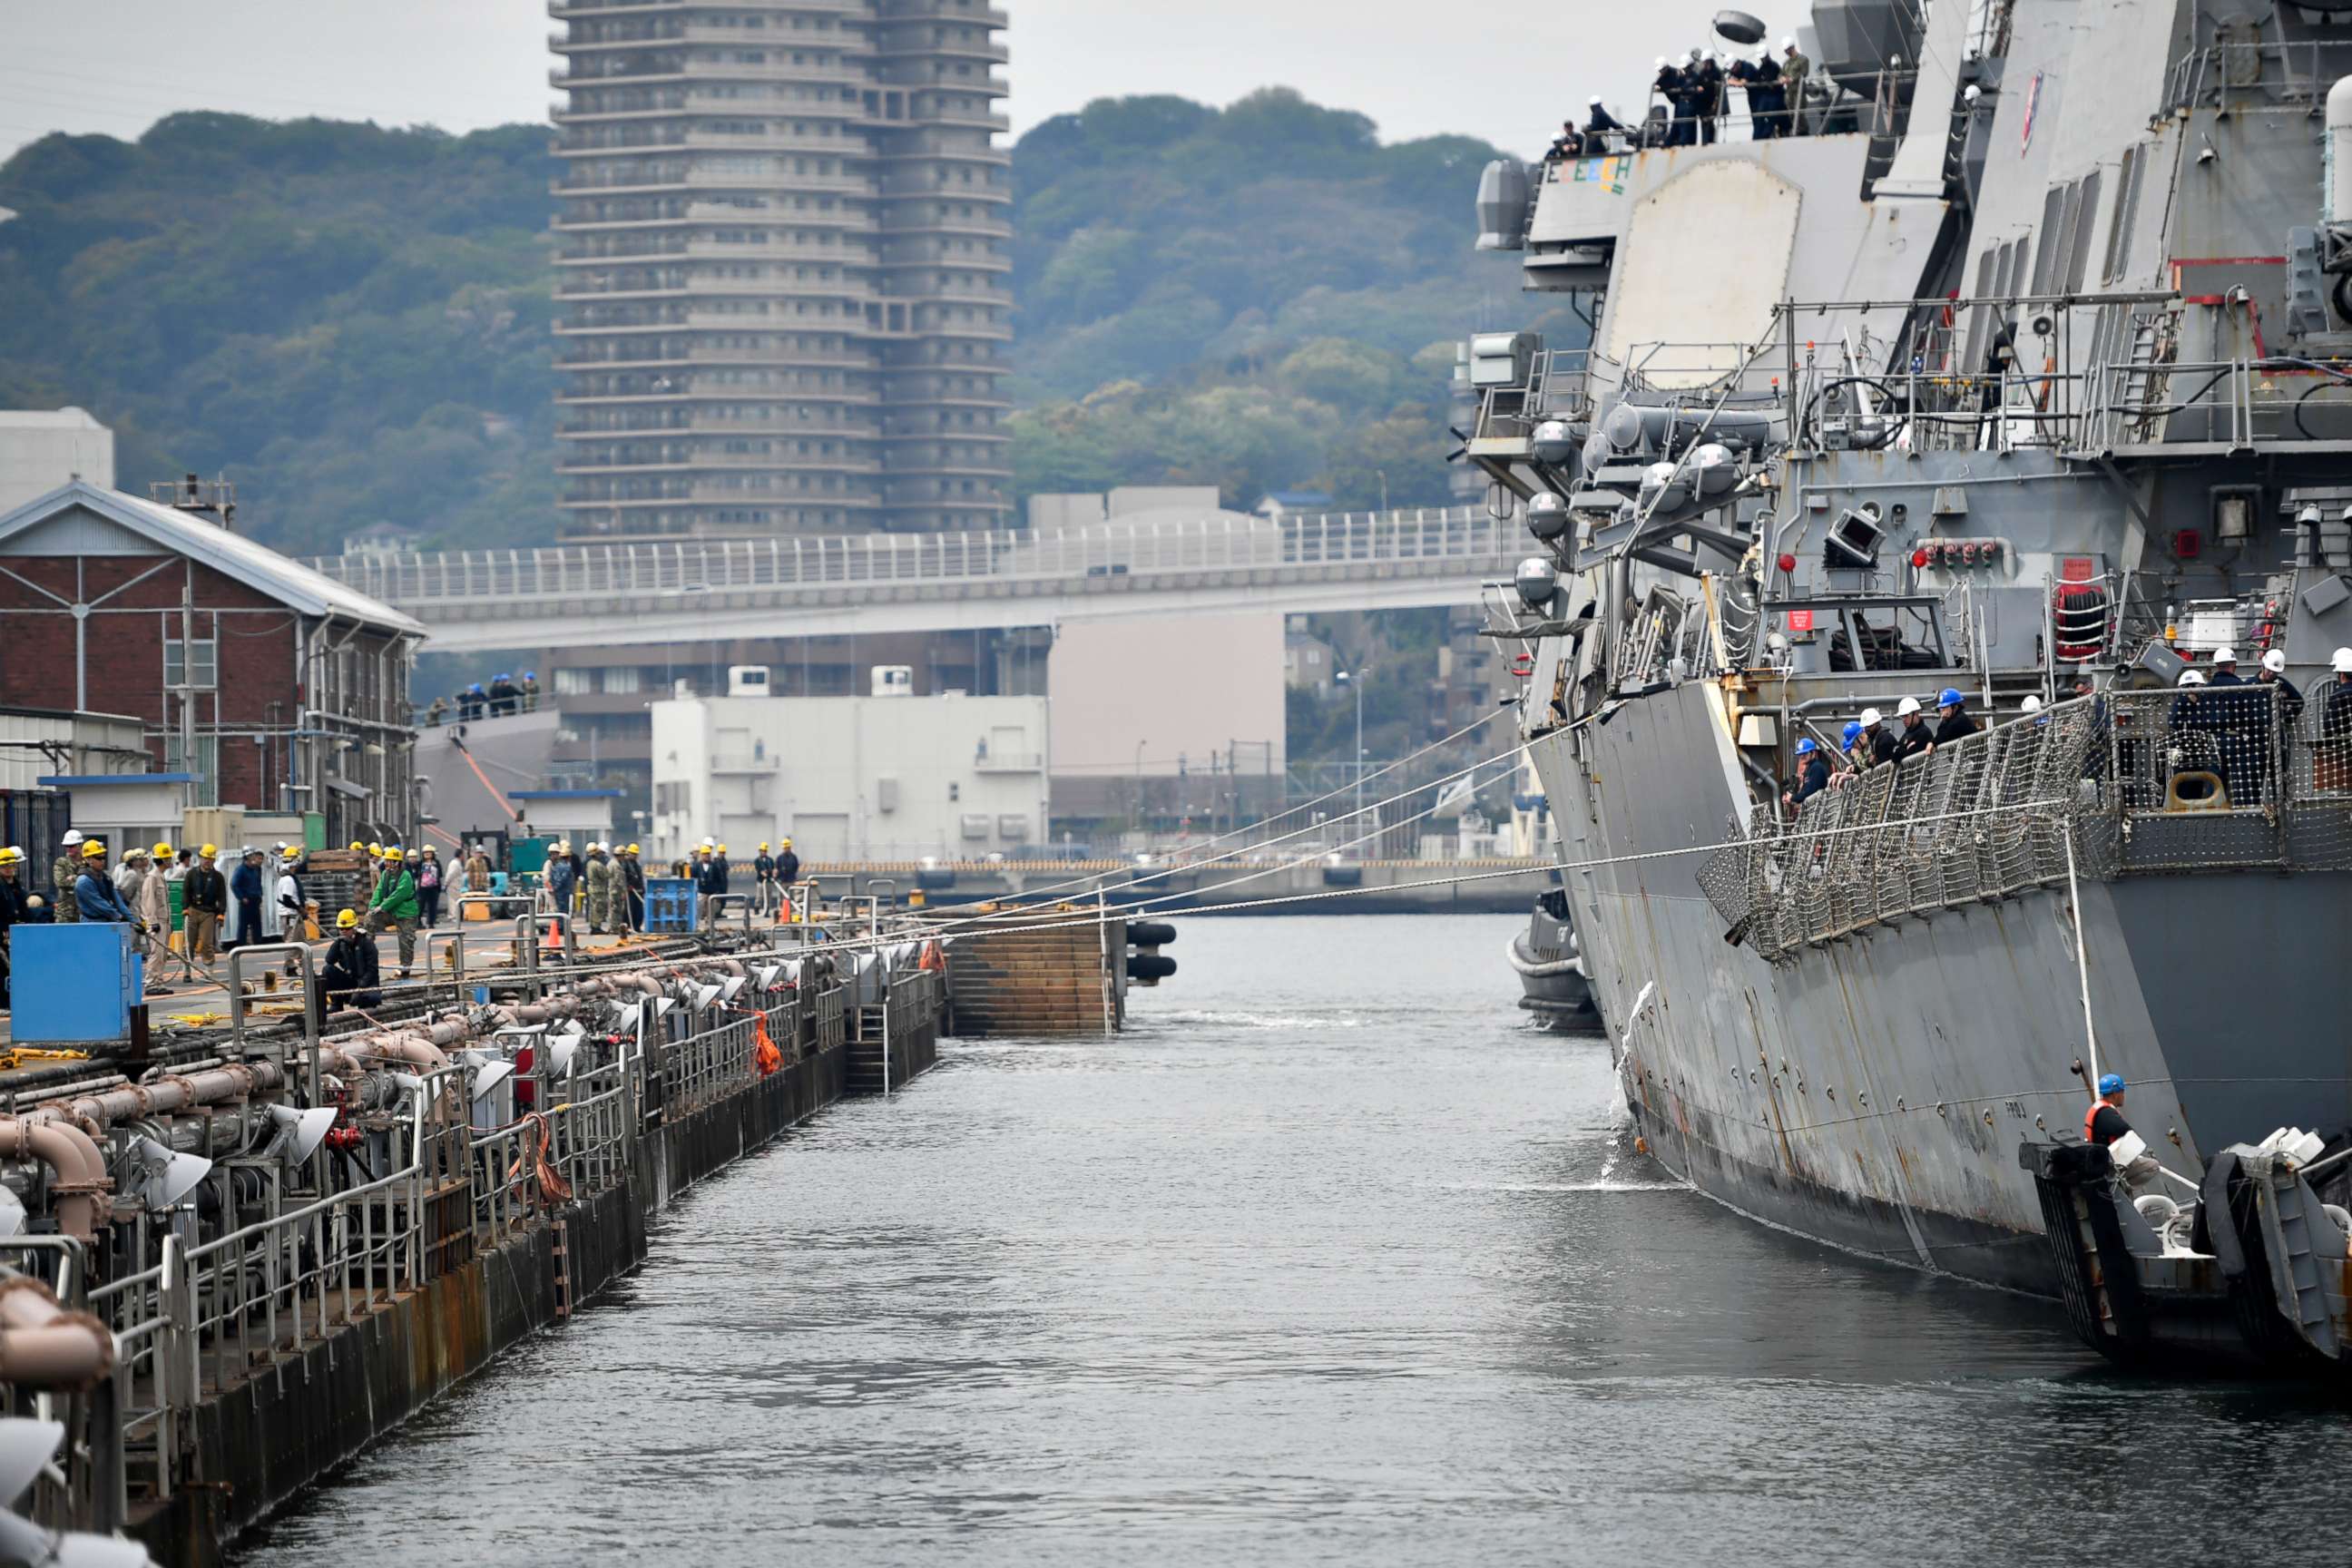 PHOTO: The Arleigh Burke-class guided missile destroyer USS Benfold (DDG65) is pulled into a dry dock at Commander, Fleet Activities Yokosuka.